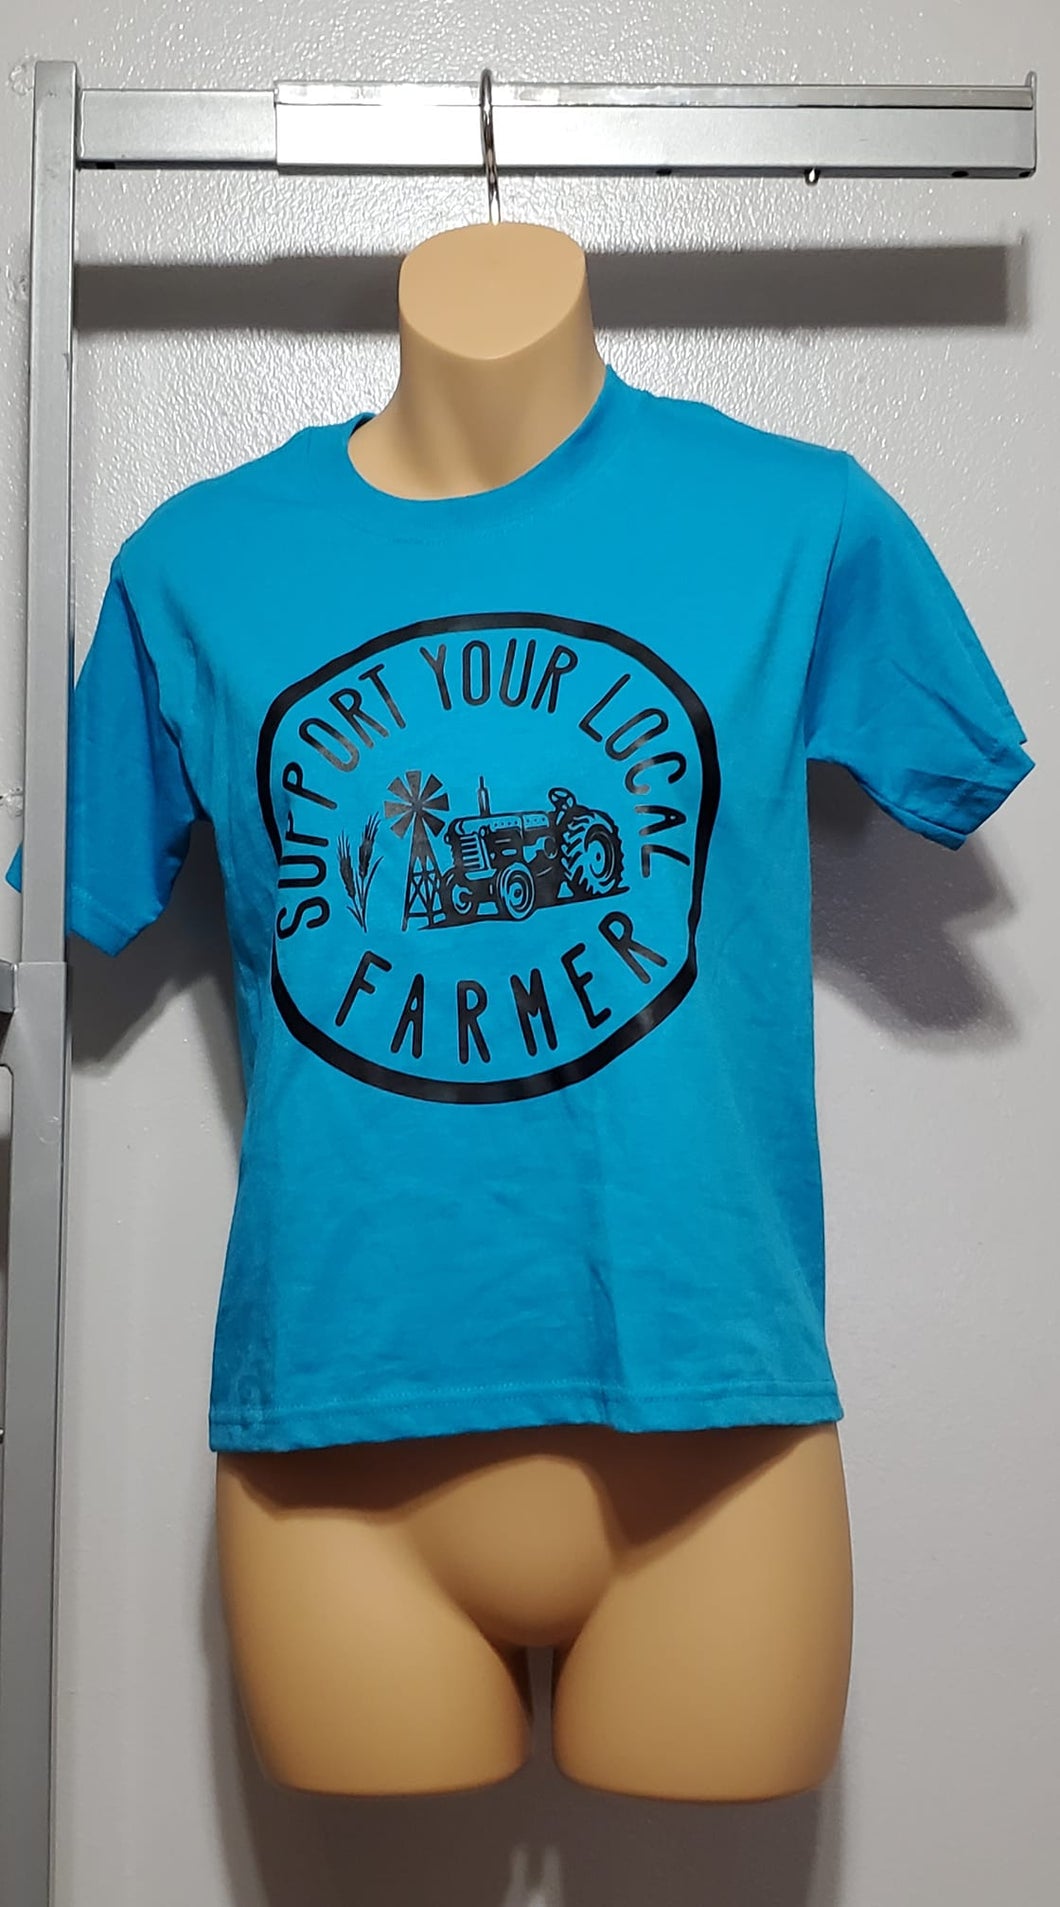 Support your local farmer